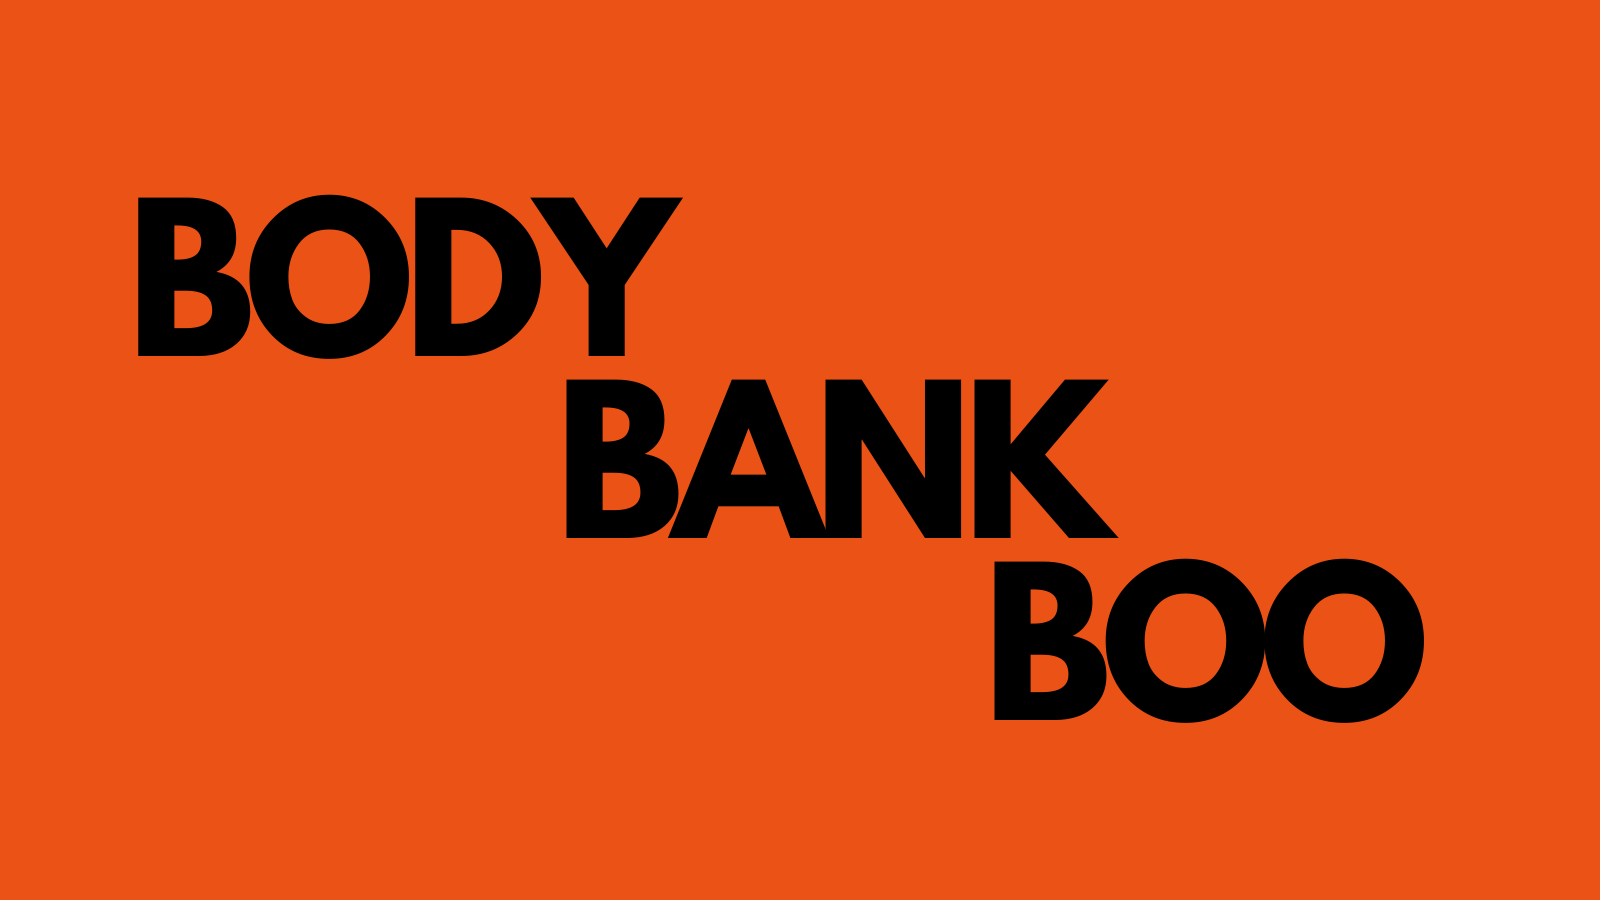 Emotional copy focuses on "body, bank and boo"